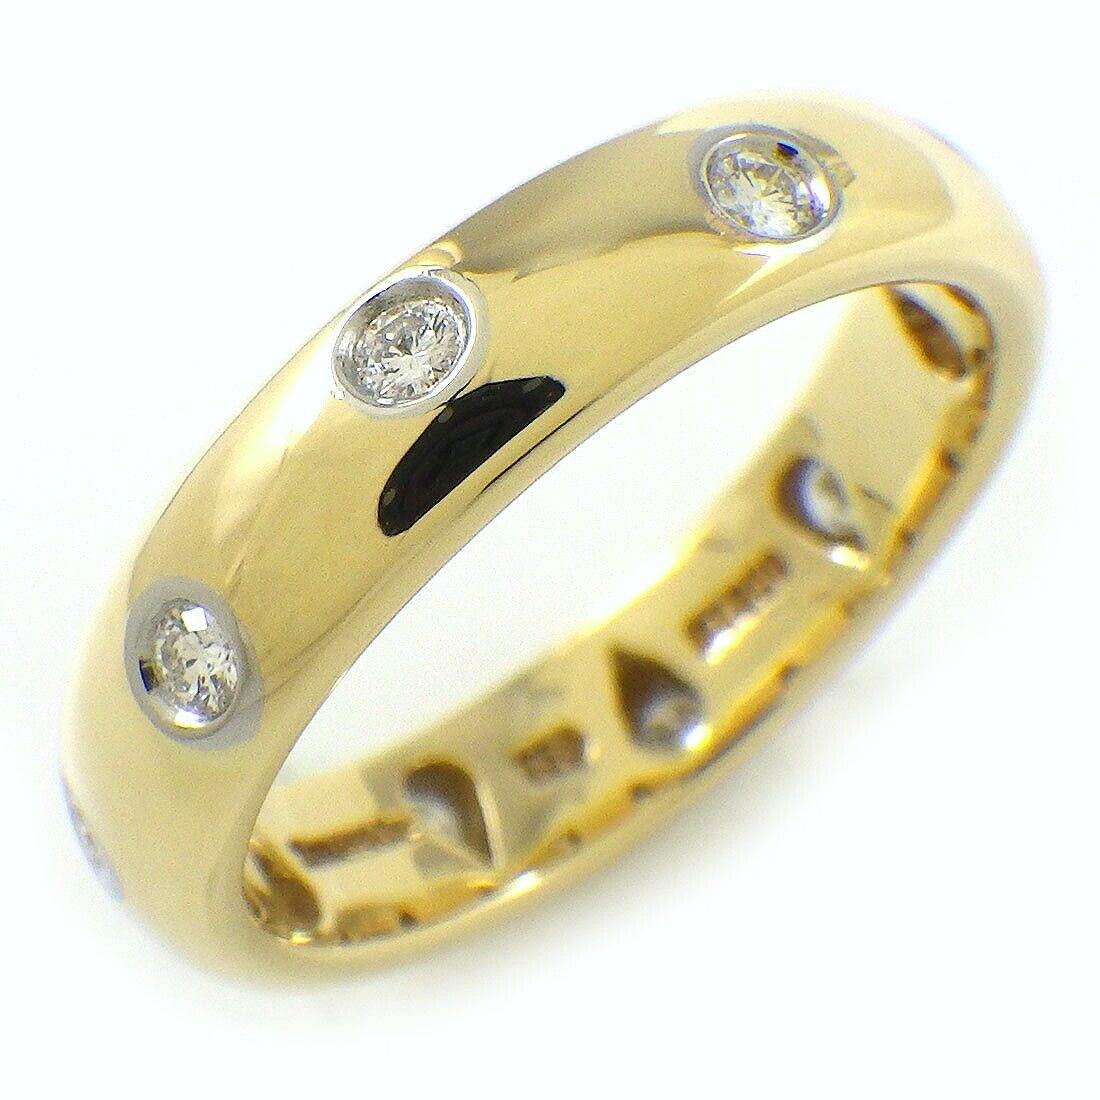 TIFFANY & Co. 18K Gold Diamond Etoile 4mm Band Ring 6.5

Metal: 18K Gold
Size: 6.5 
Band Width: 4mm
Diamond: 10 round brilliant diamonds, carat total weight .22
Hallmark: TIFFANY&CO. 750 PT950 
Condition: Excellent condition, like new

Authenticity